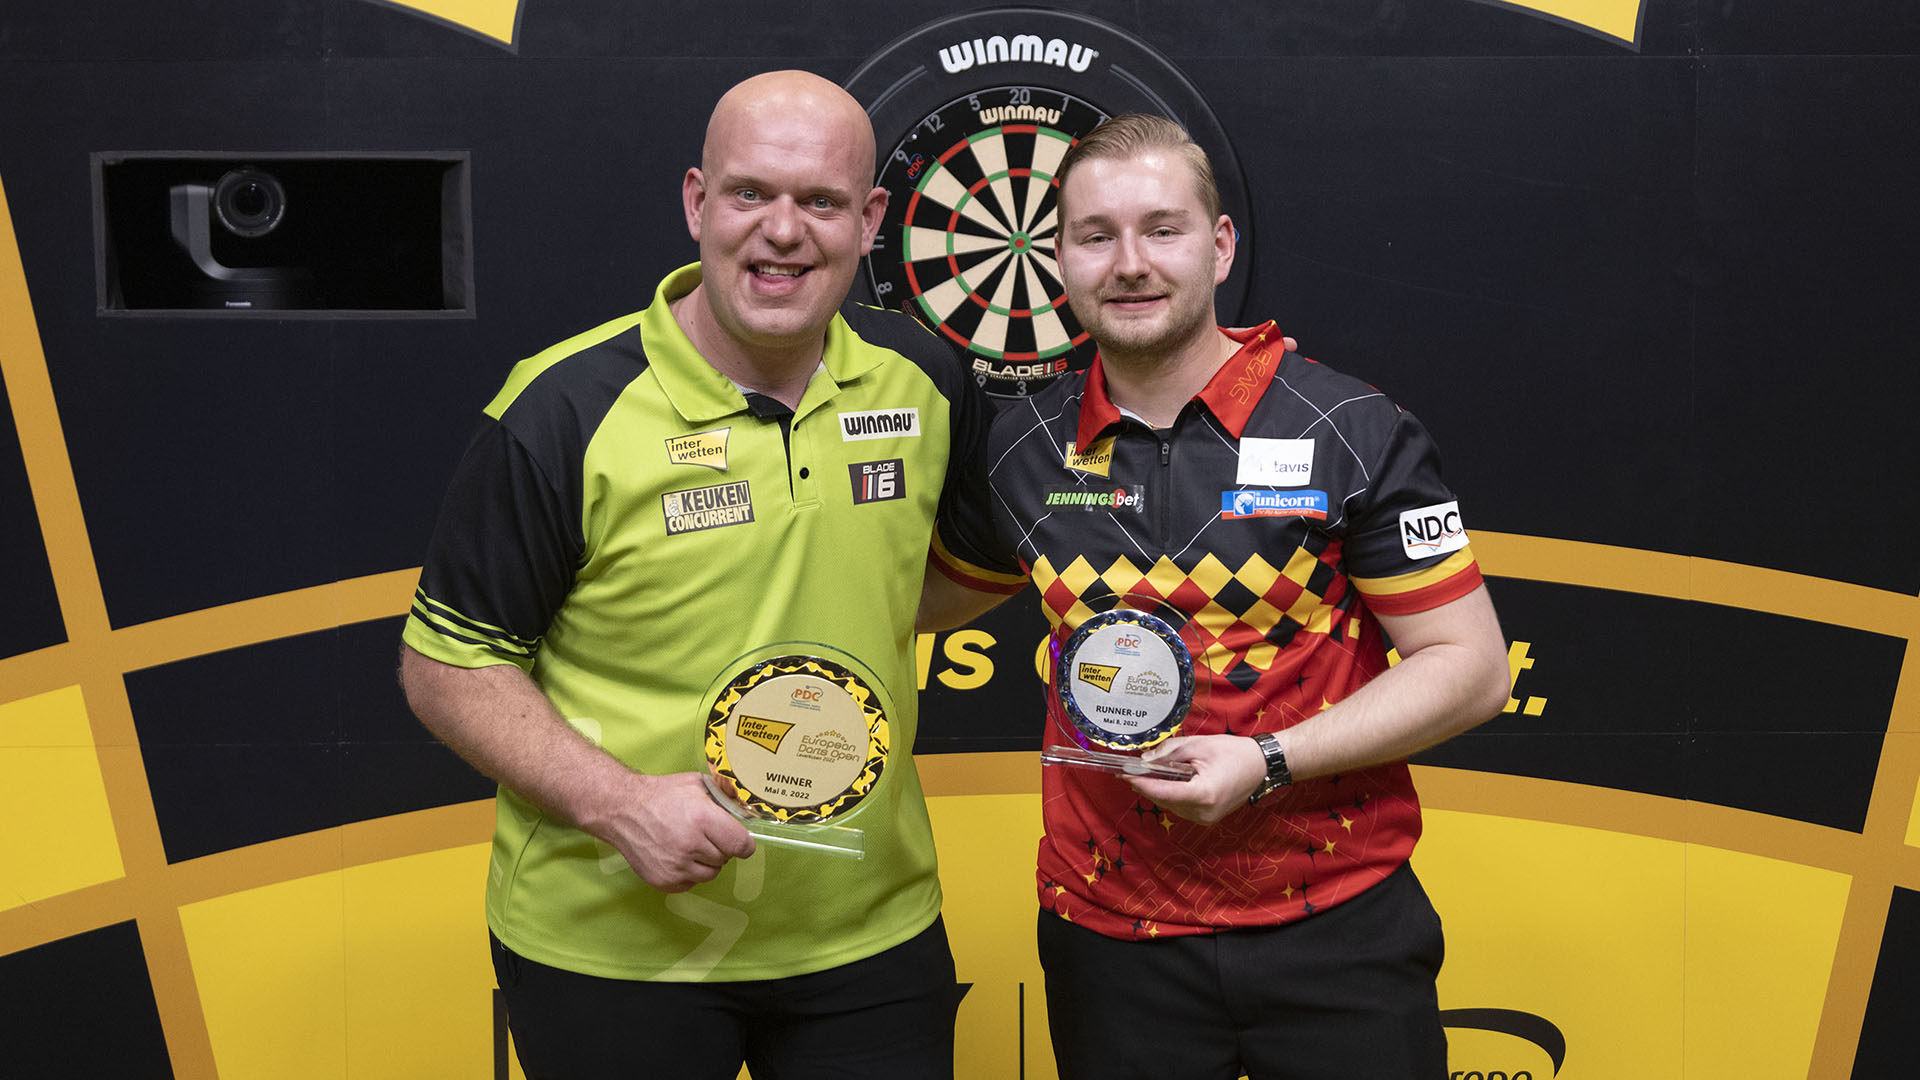 European Darts Open 2022 Draw, schedule, results, odds and TV coverage details